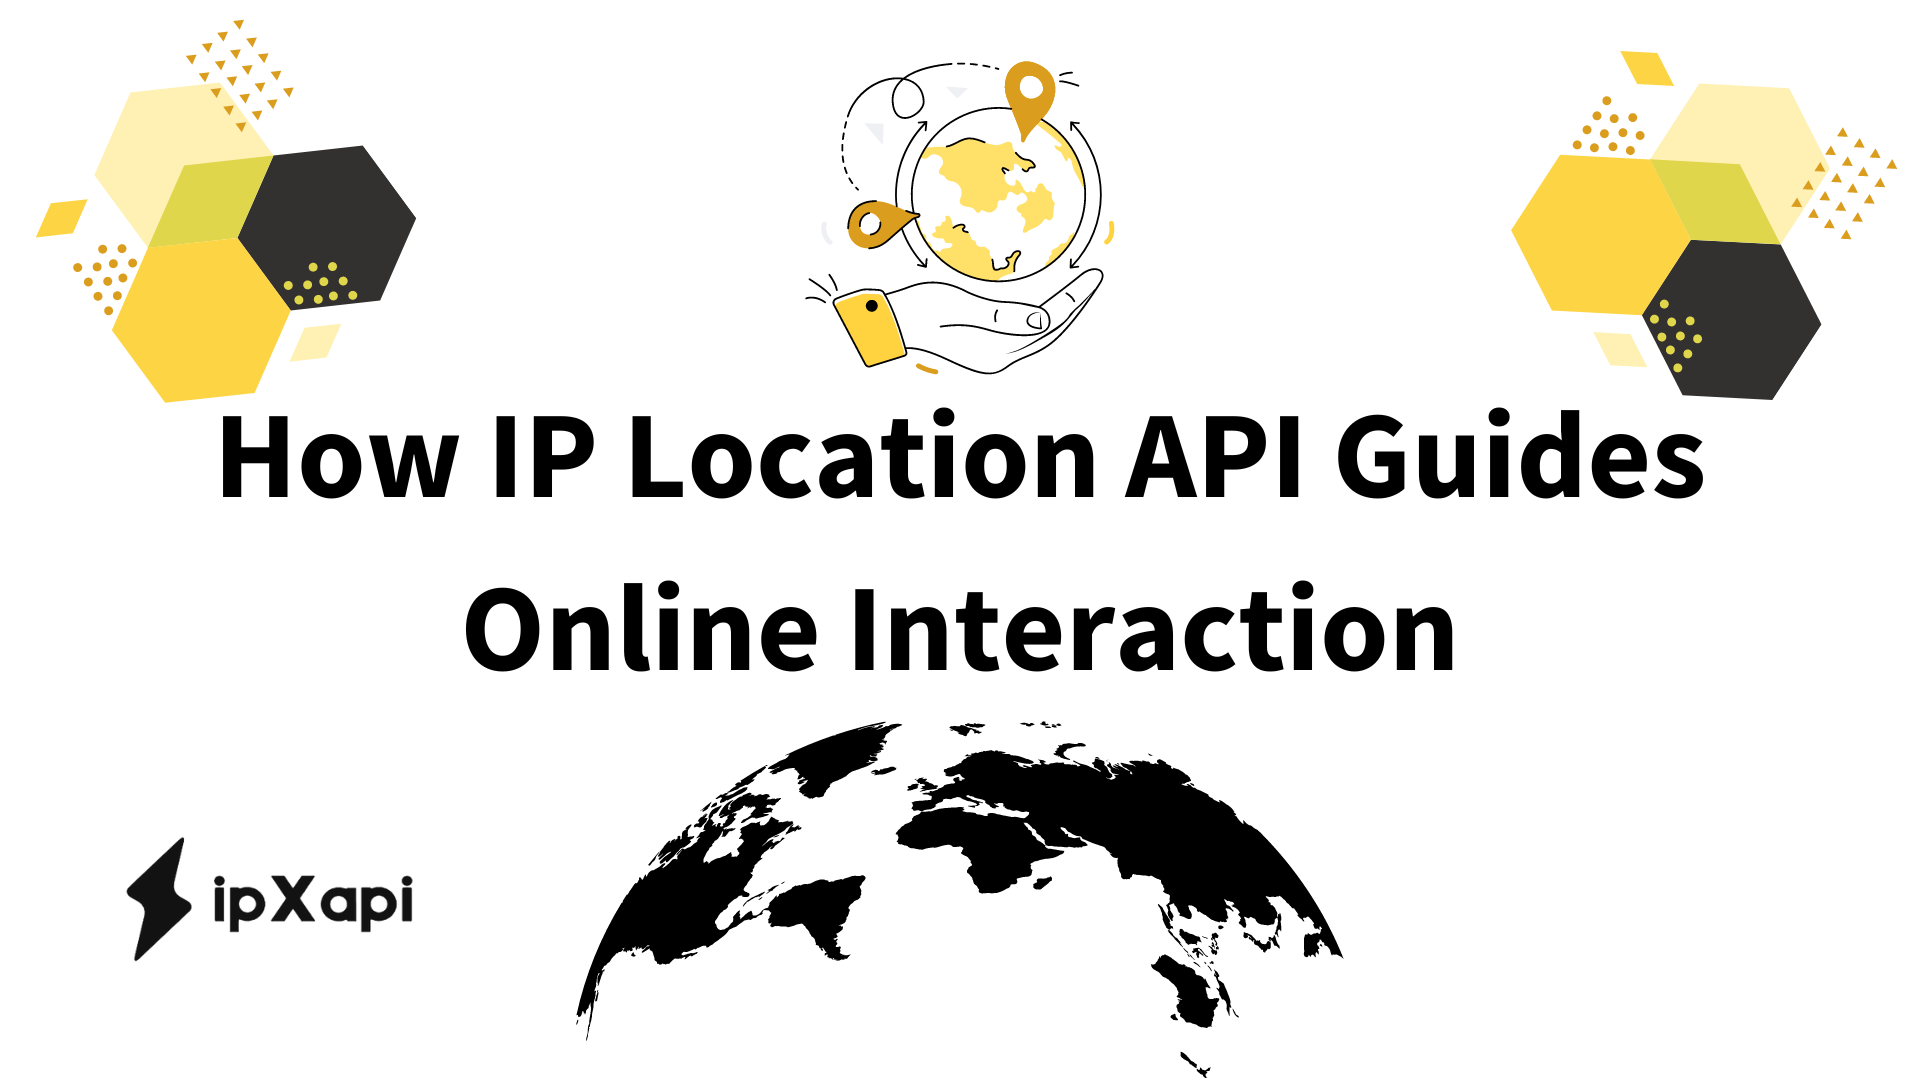 How IP Location API Guides Online Interaction